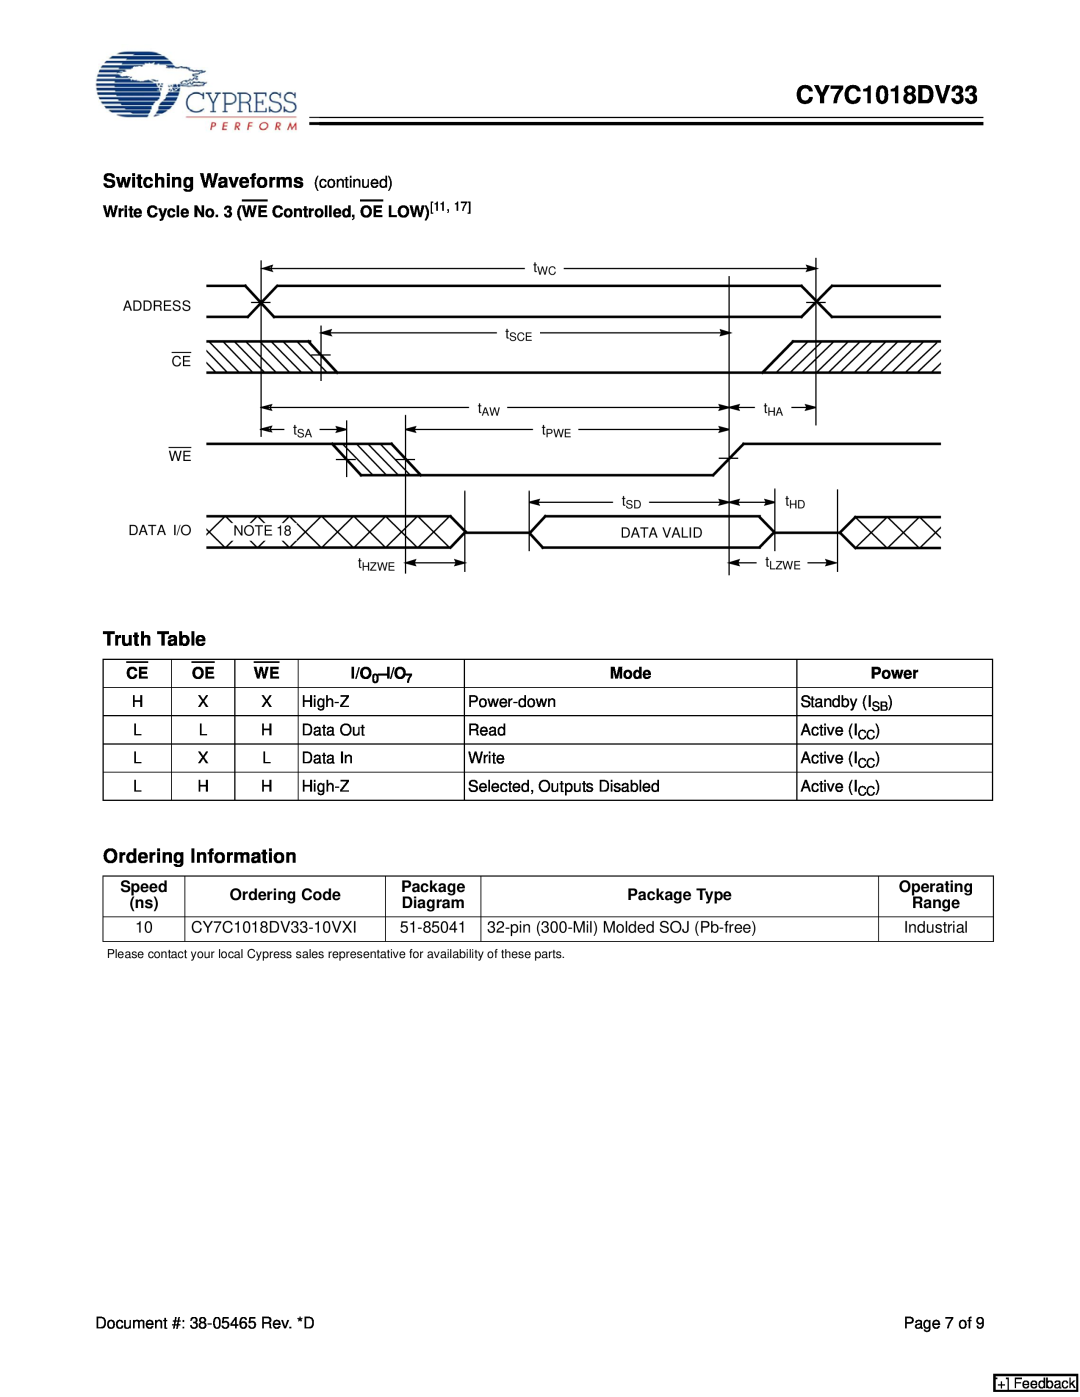 Cypress CY7C1018DV33 manual Truth Table, Ordering Information, Switching Waveforms continued, Industrial 